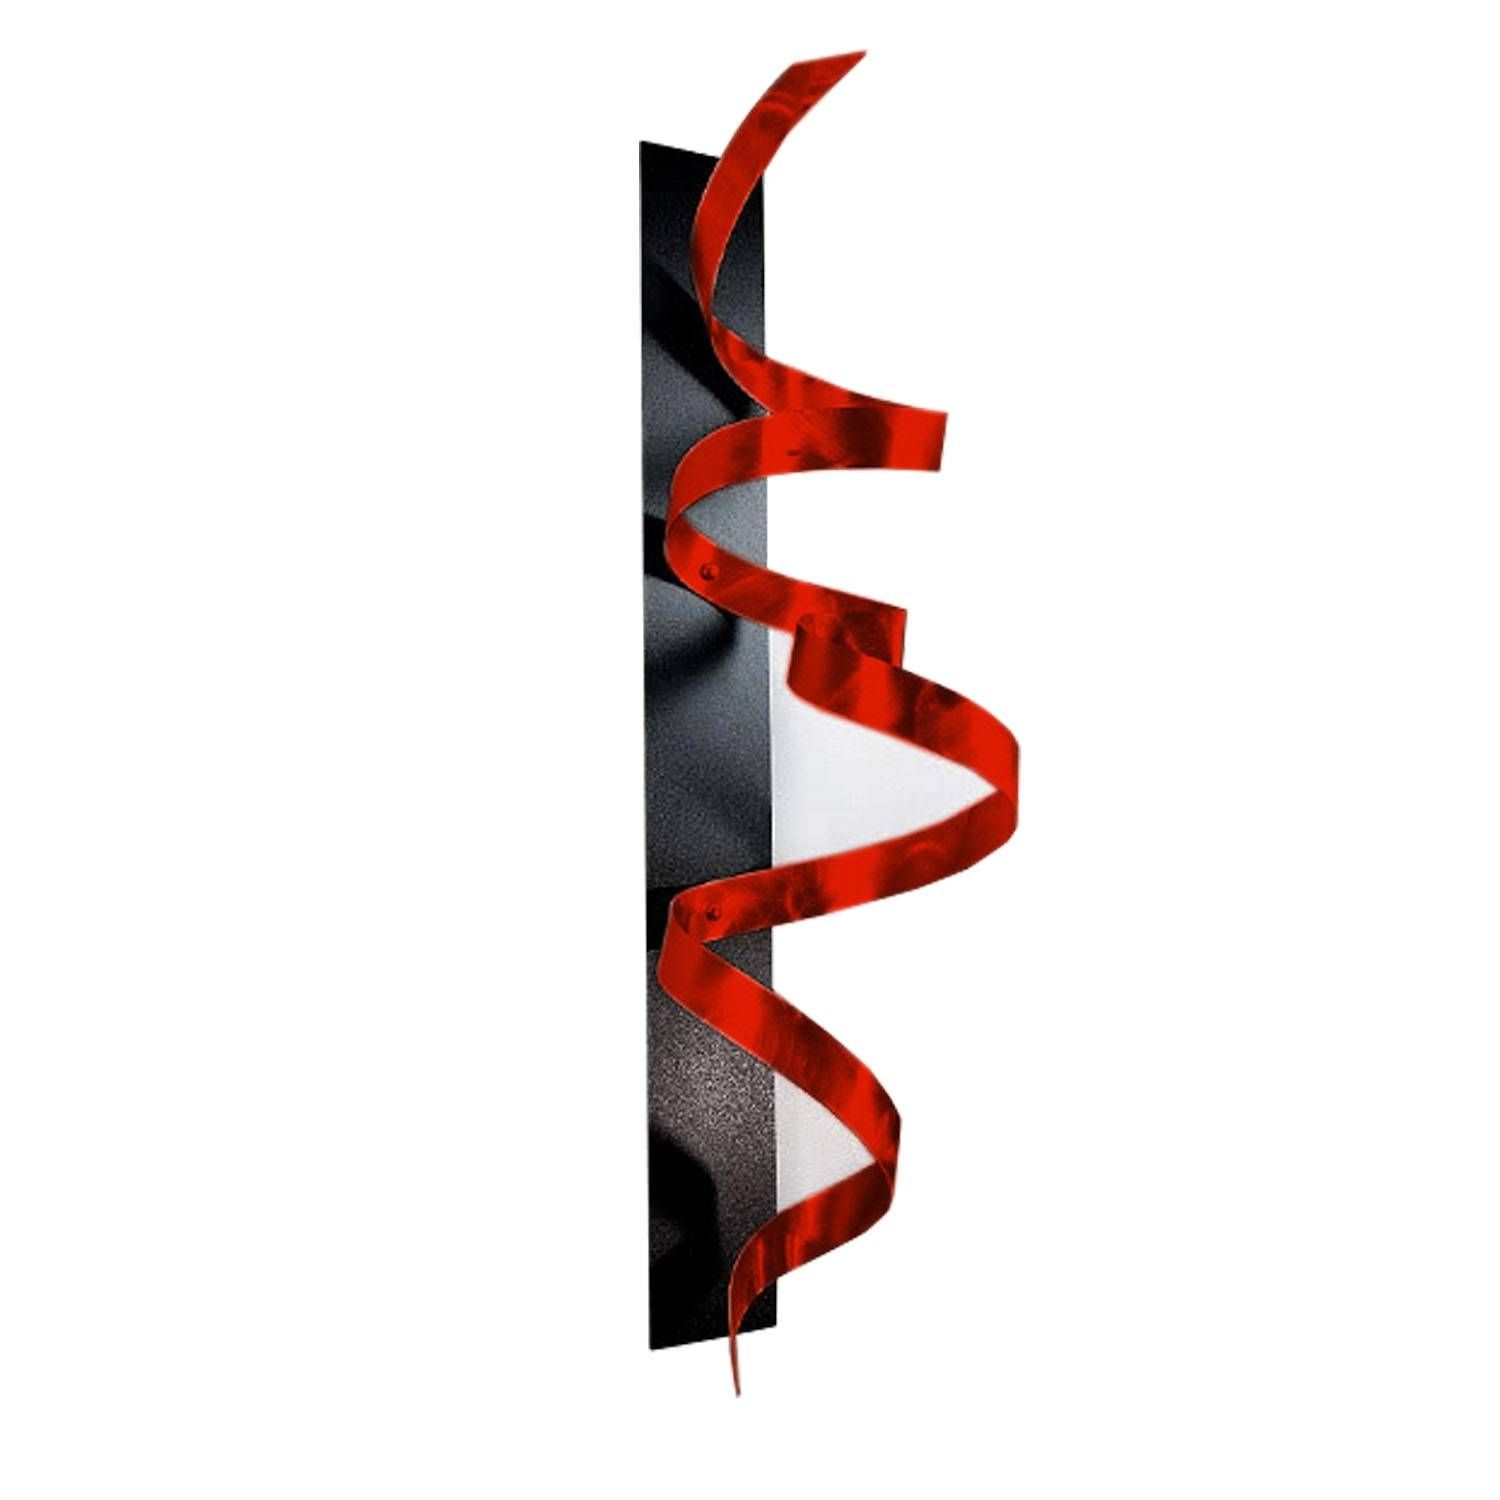 Black Knight Red – Black & Red 3d Metal Wall Art Sculpture Accent With Regard To Recent Red And Black Metal Wall Art (View 16 of 20)